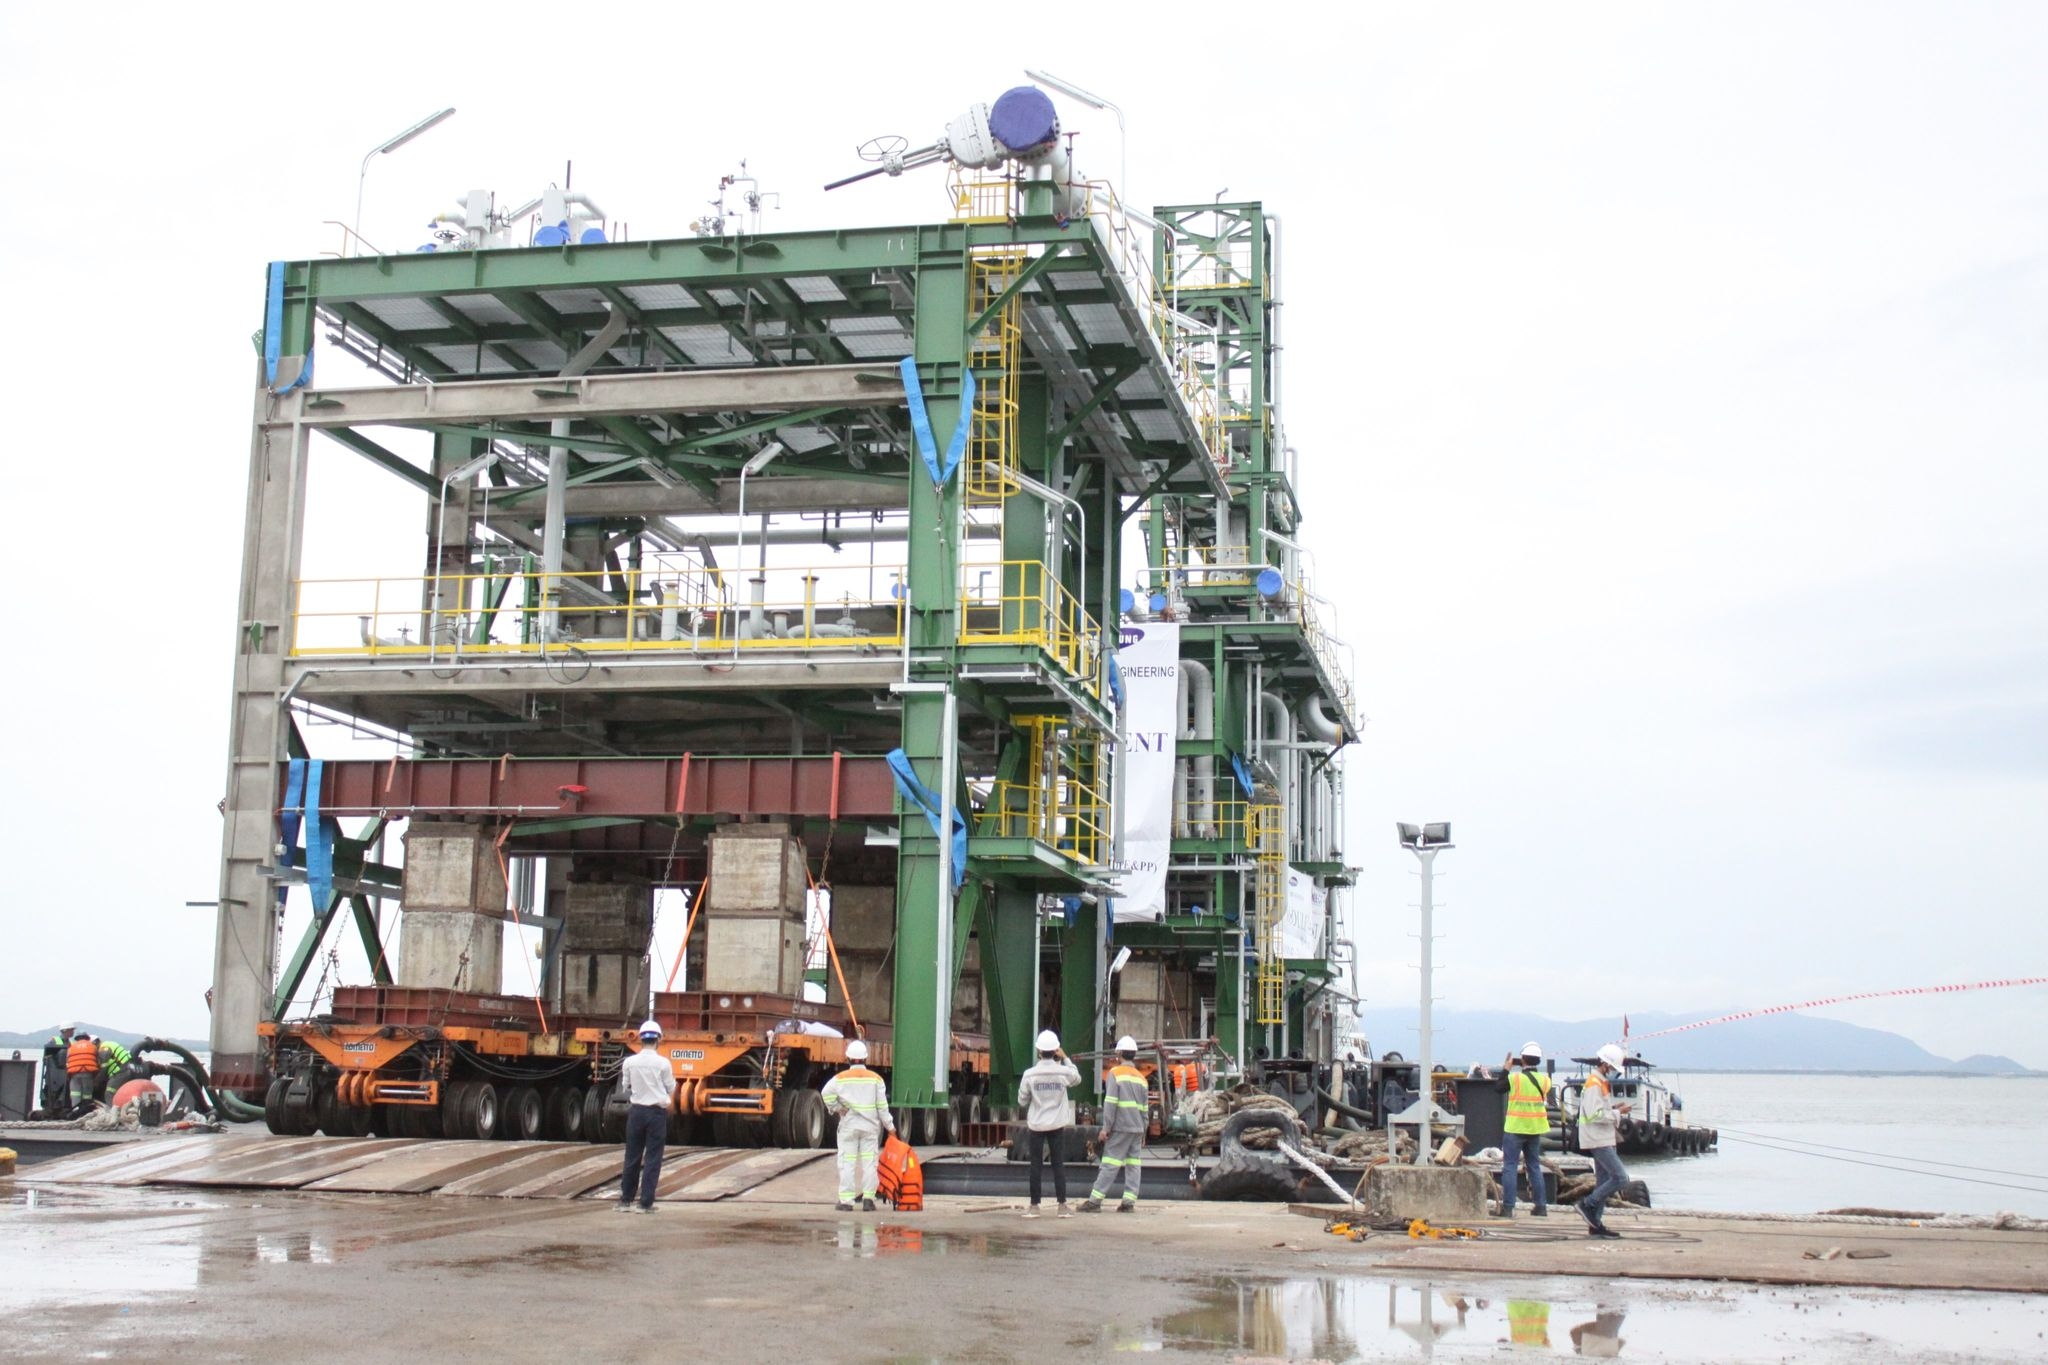 AMECC LAUNCHED SUCCESSFULLY THE FIRST 2 MODULES - LONG SON PETROCHEMICAL COMPLEX PROJECT